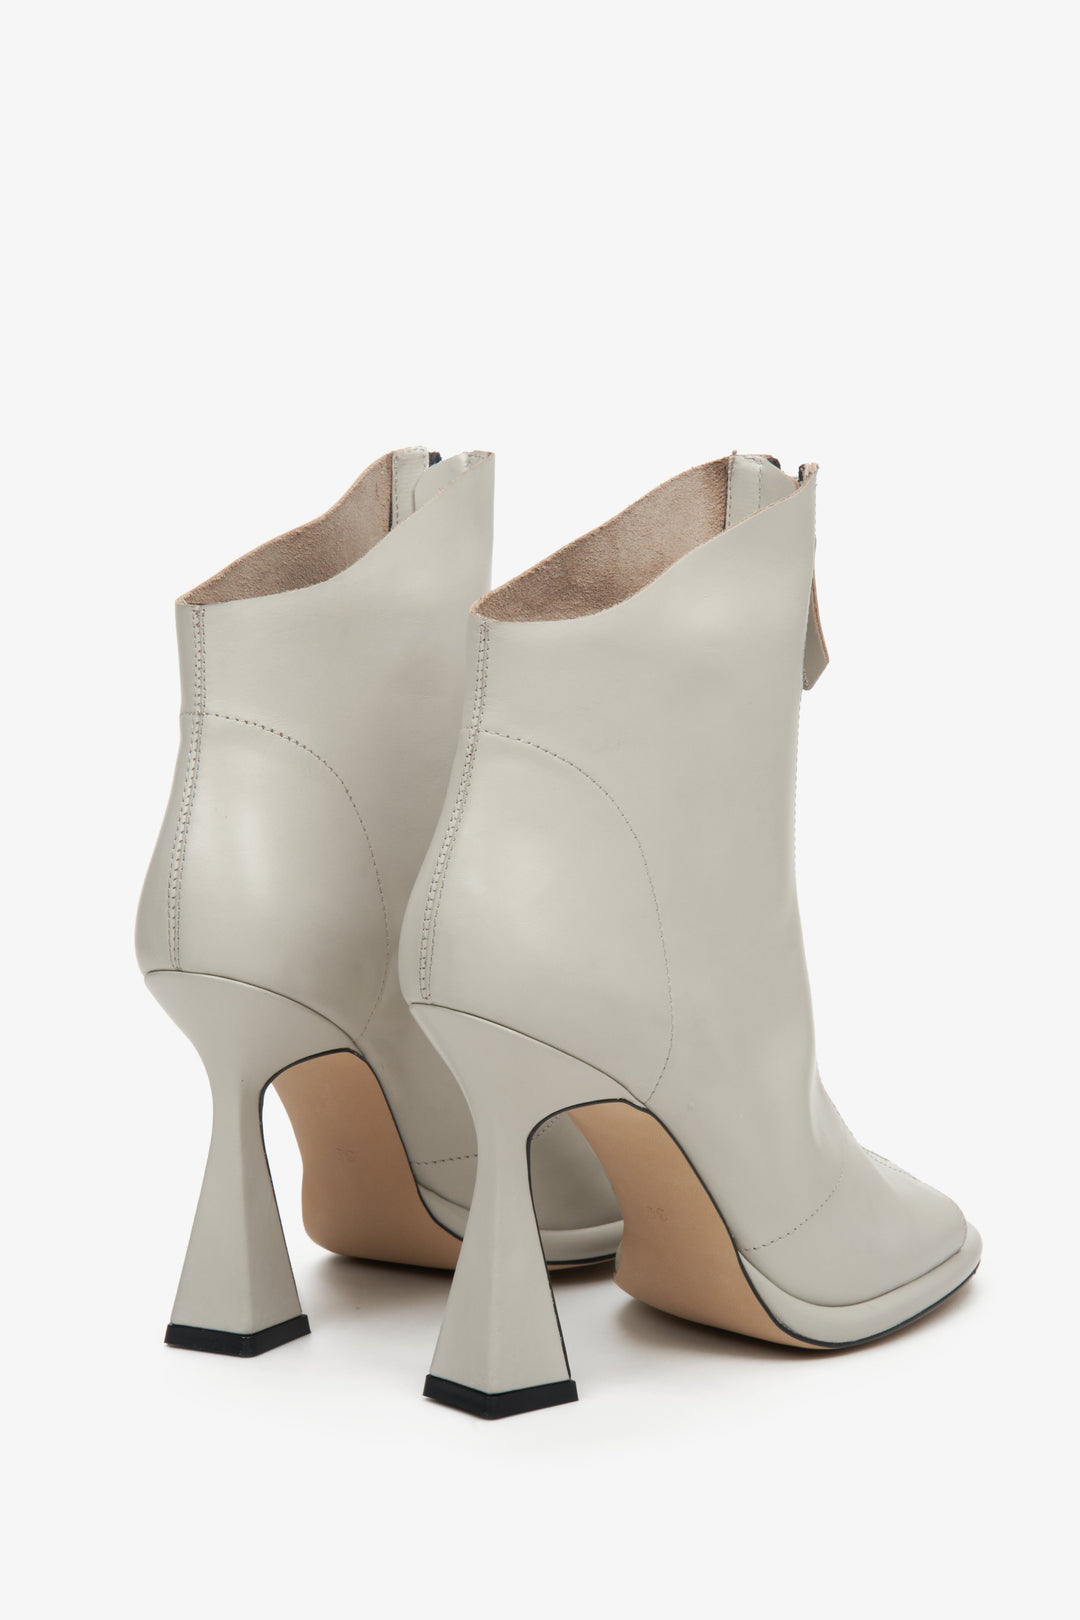 Women's leather open toe ankle boots for summer Estro in gray - close-up of the back of the model.